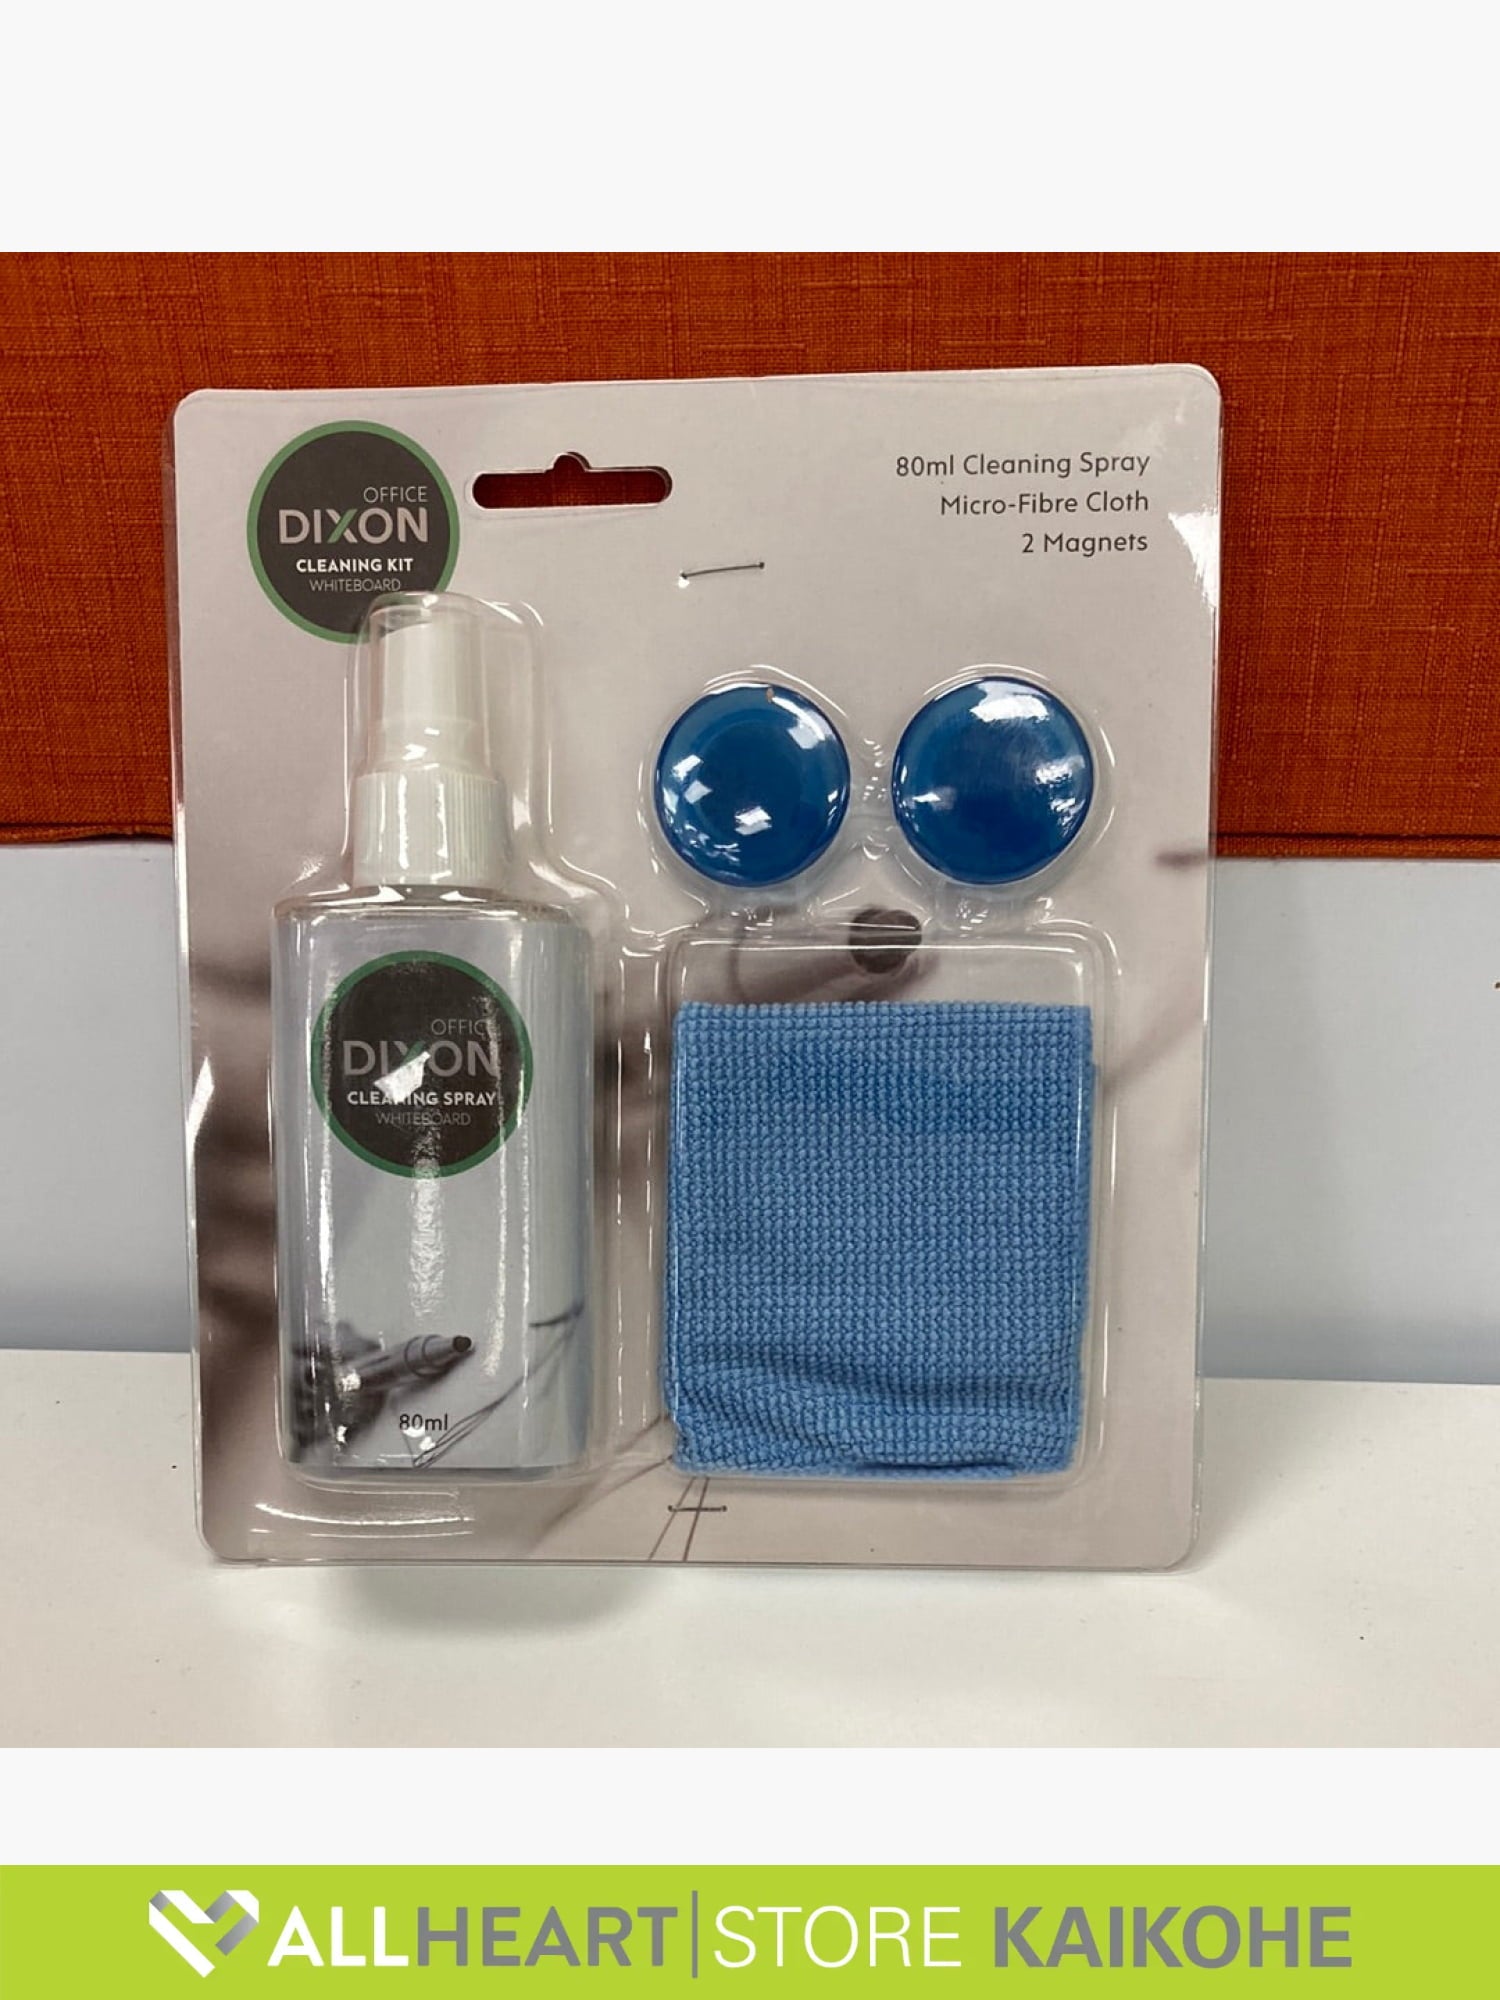 Dixon Whiteboard Cleaning Kit